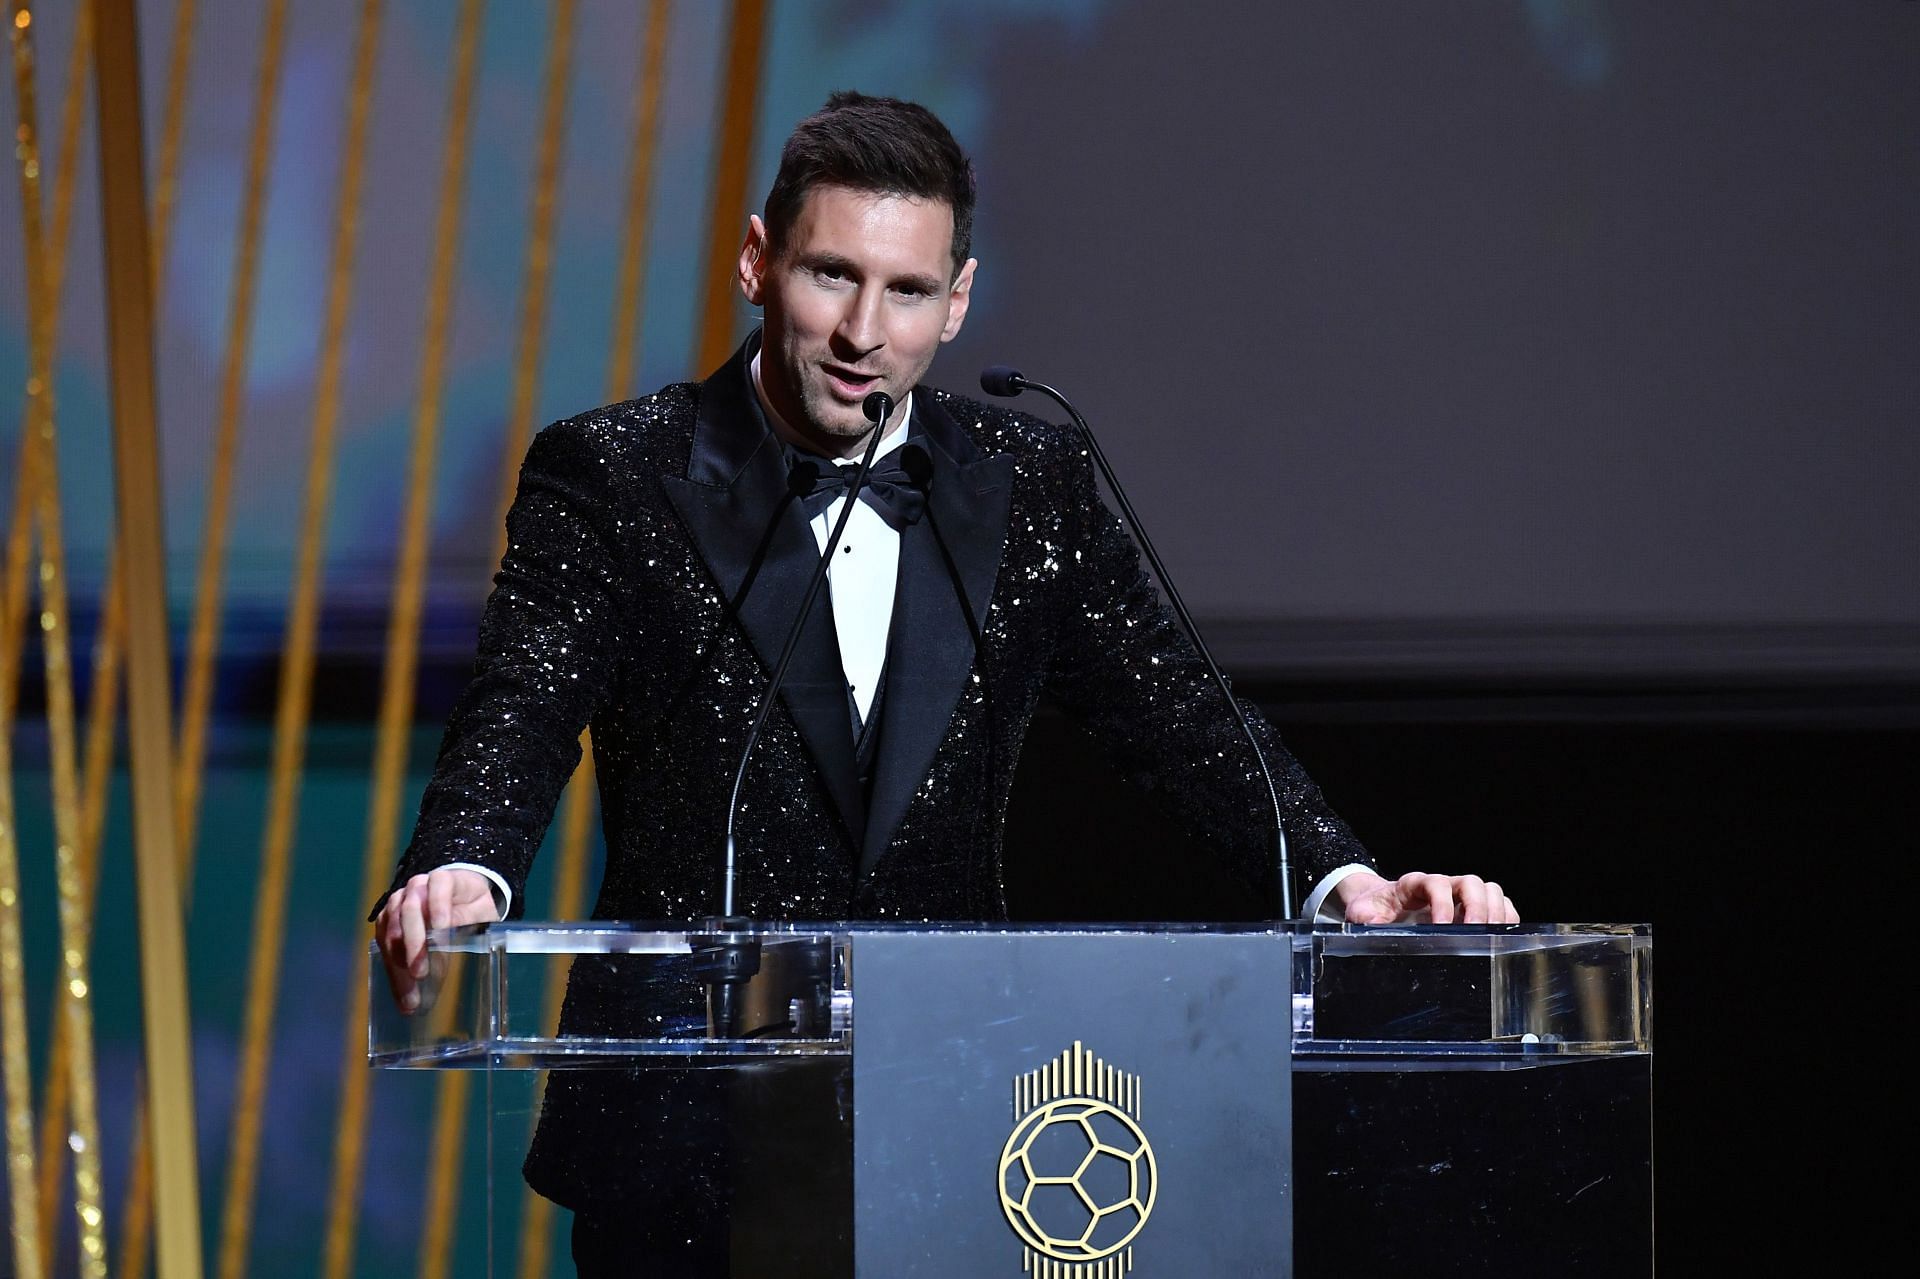 Lionel Messi has been shortlisted for the Dubai Globe Soccer Awards